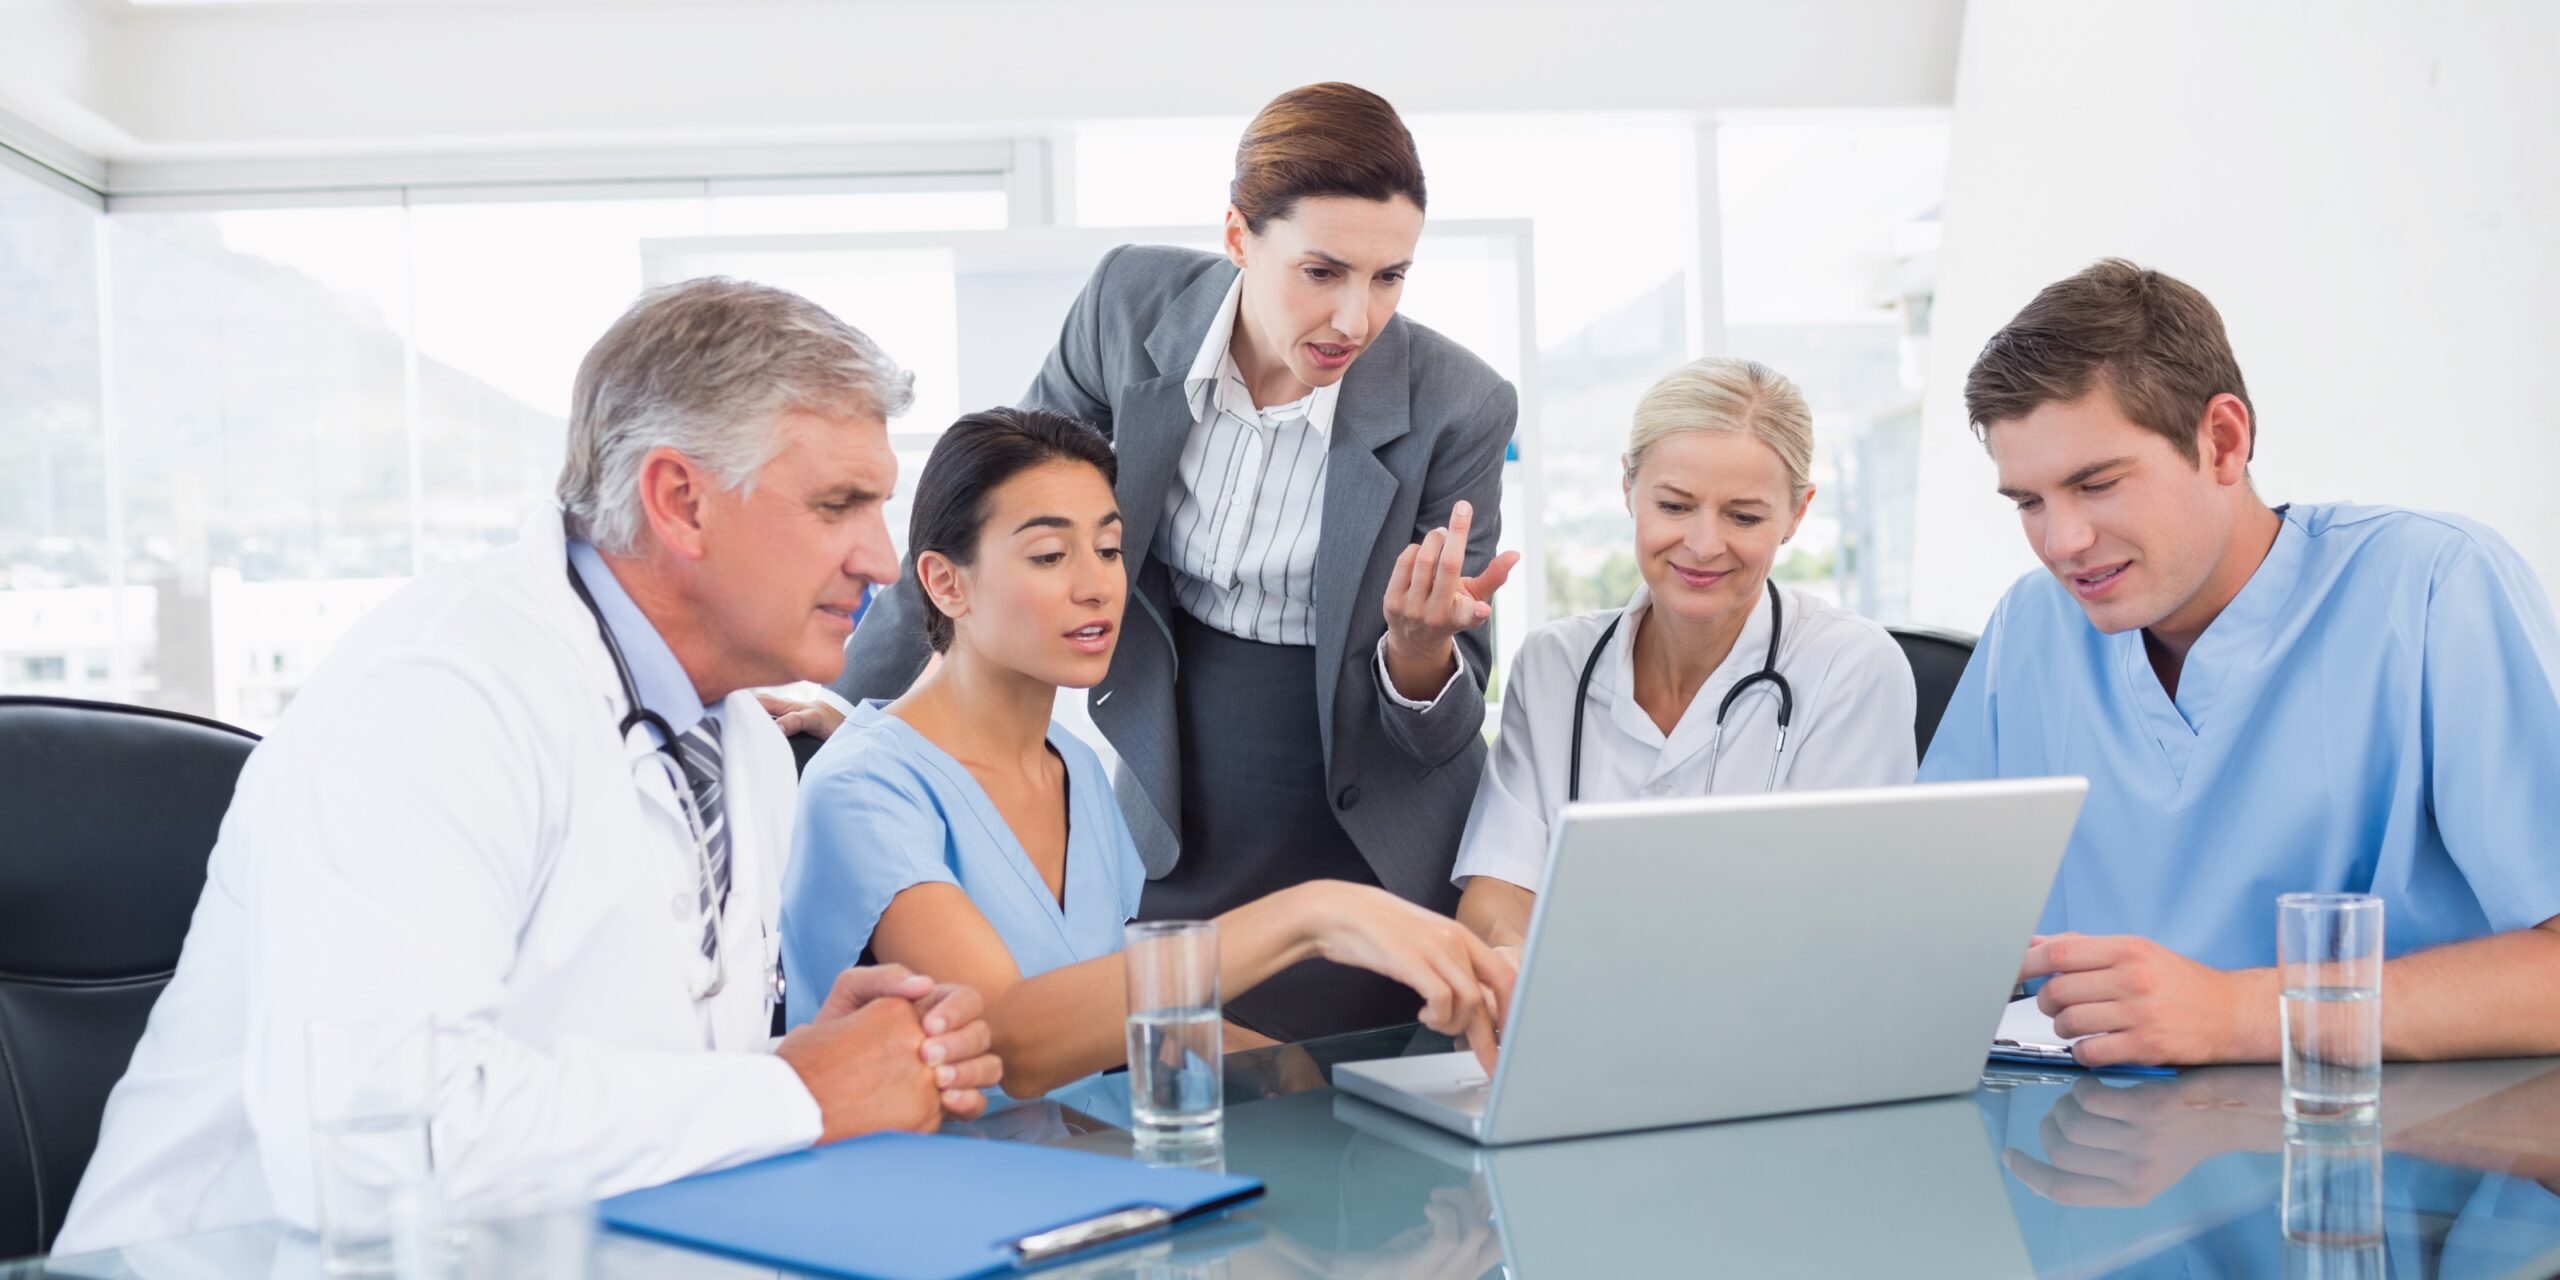 How Healthcare Leaders Drive Culture and Employee Recruitment